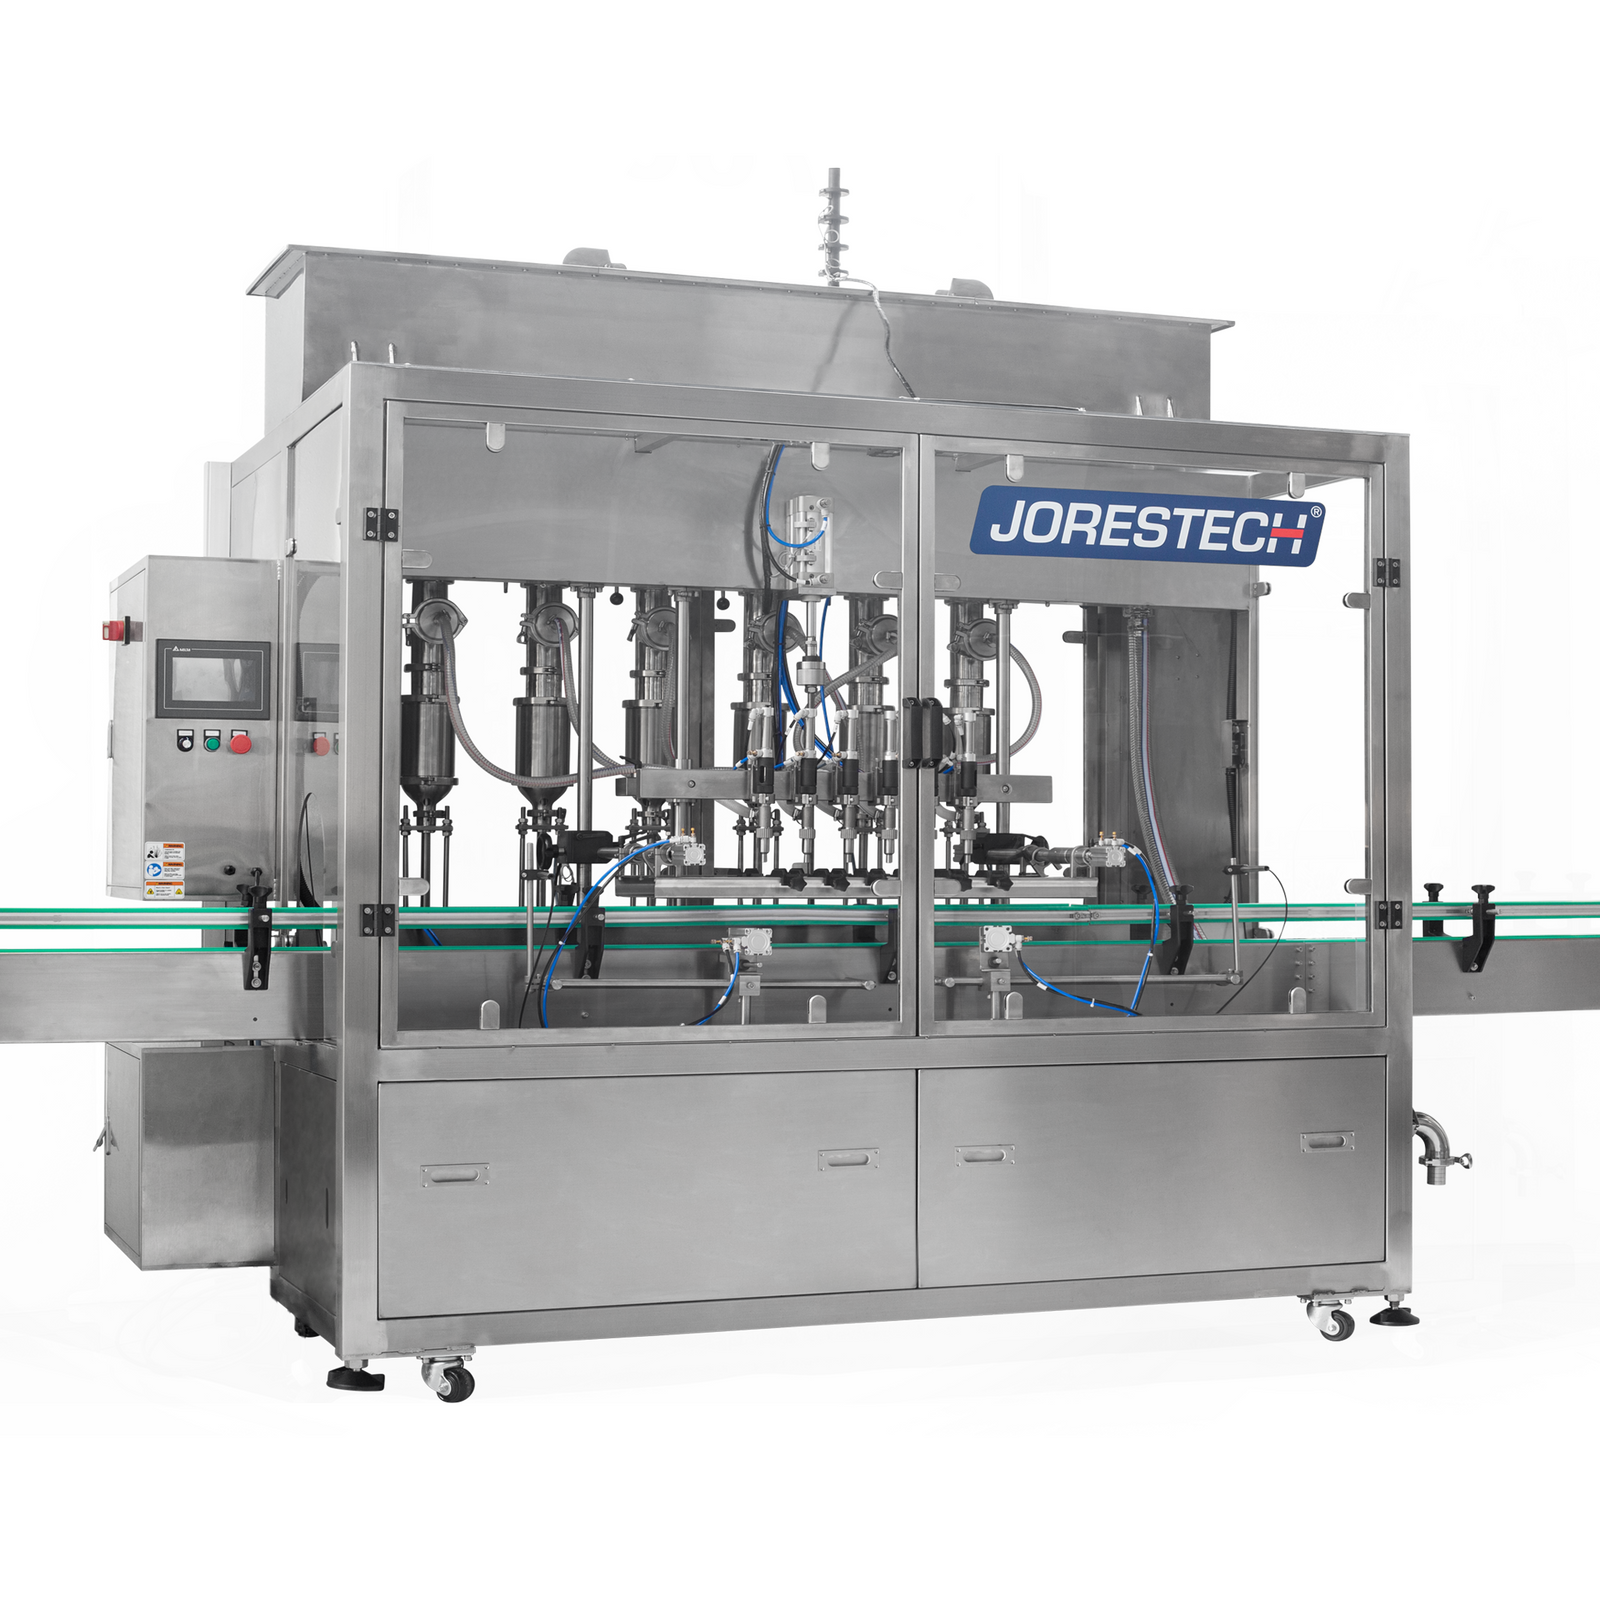 6 head stainless steel inline piston filling machine with conveyor by JORES TECHNOLOGIES®